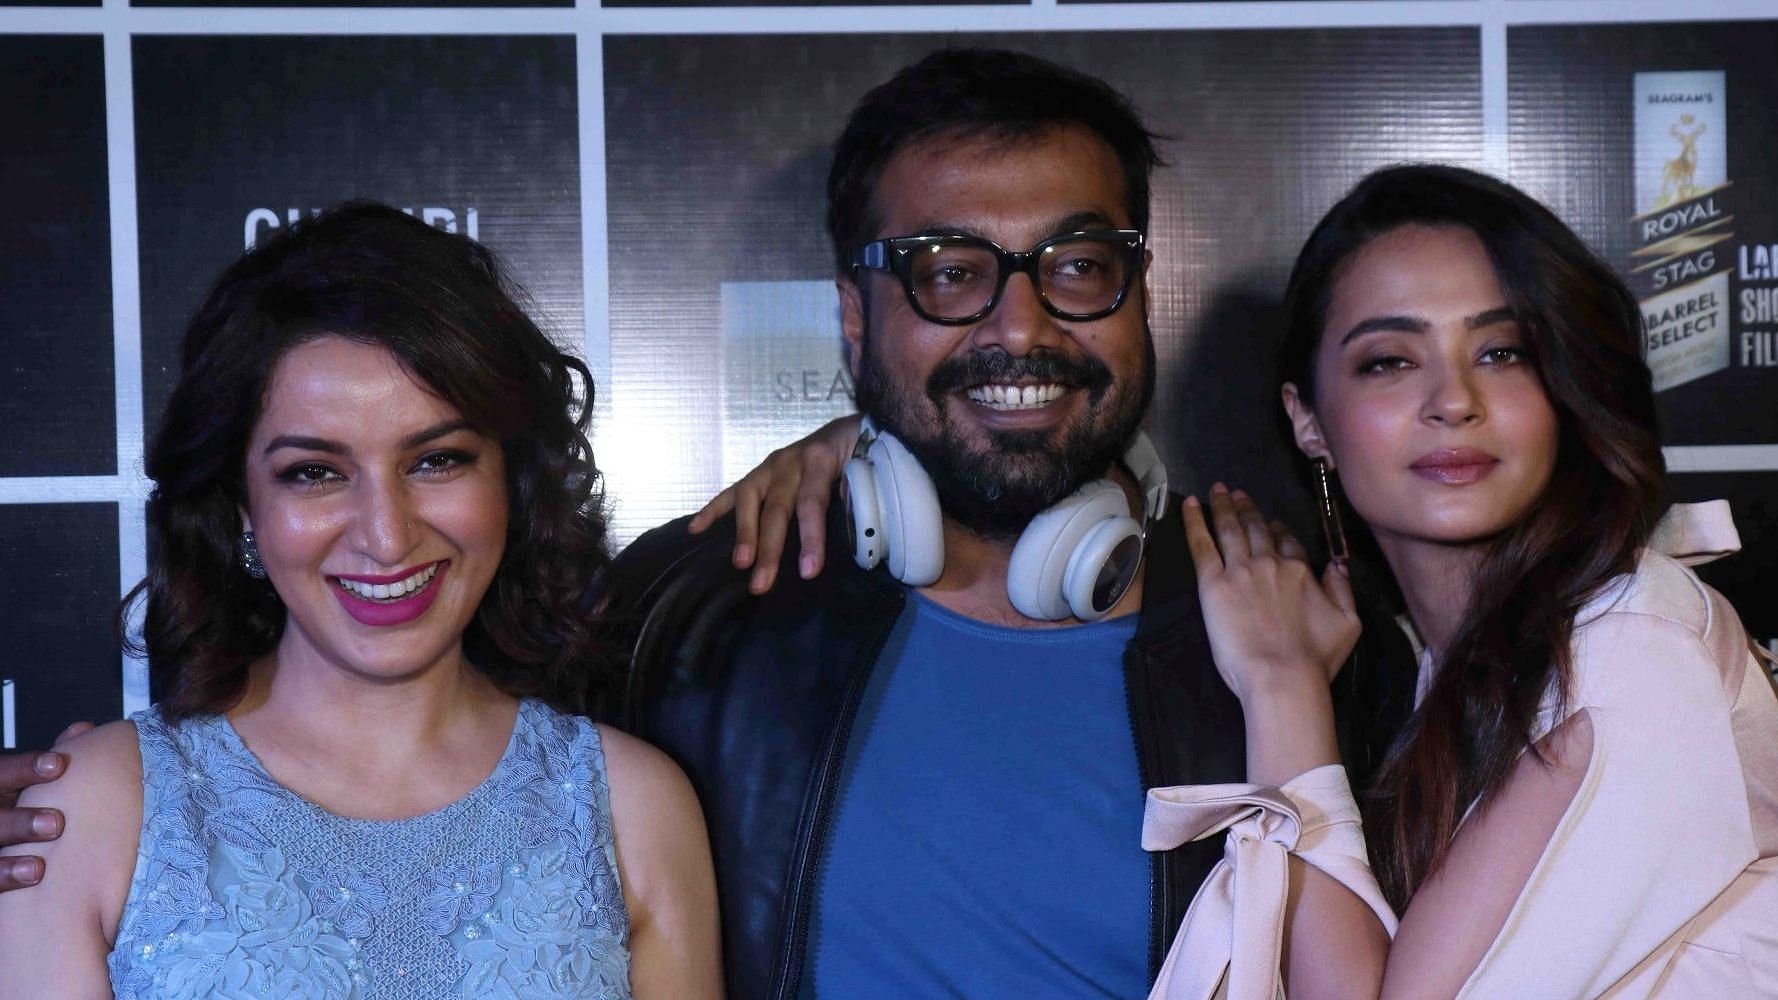 Tisca Chopra, Anurag Kashyap and Surveen Chawla at an event.